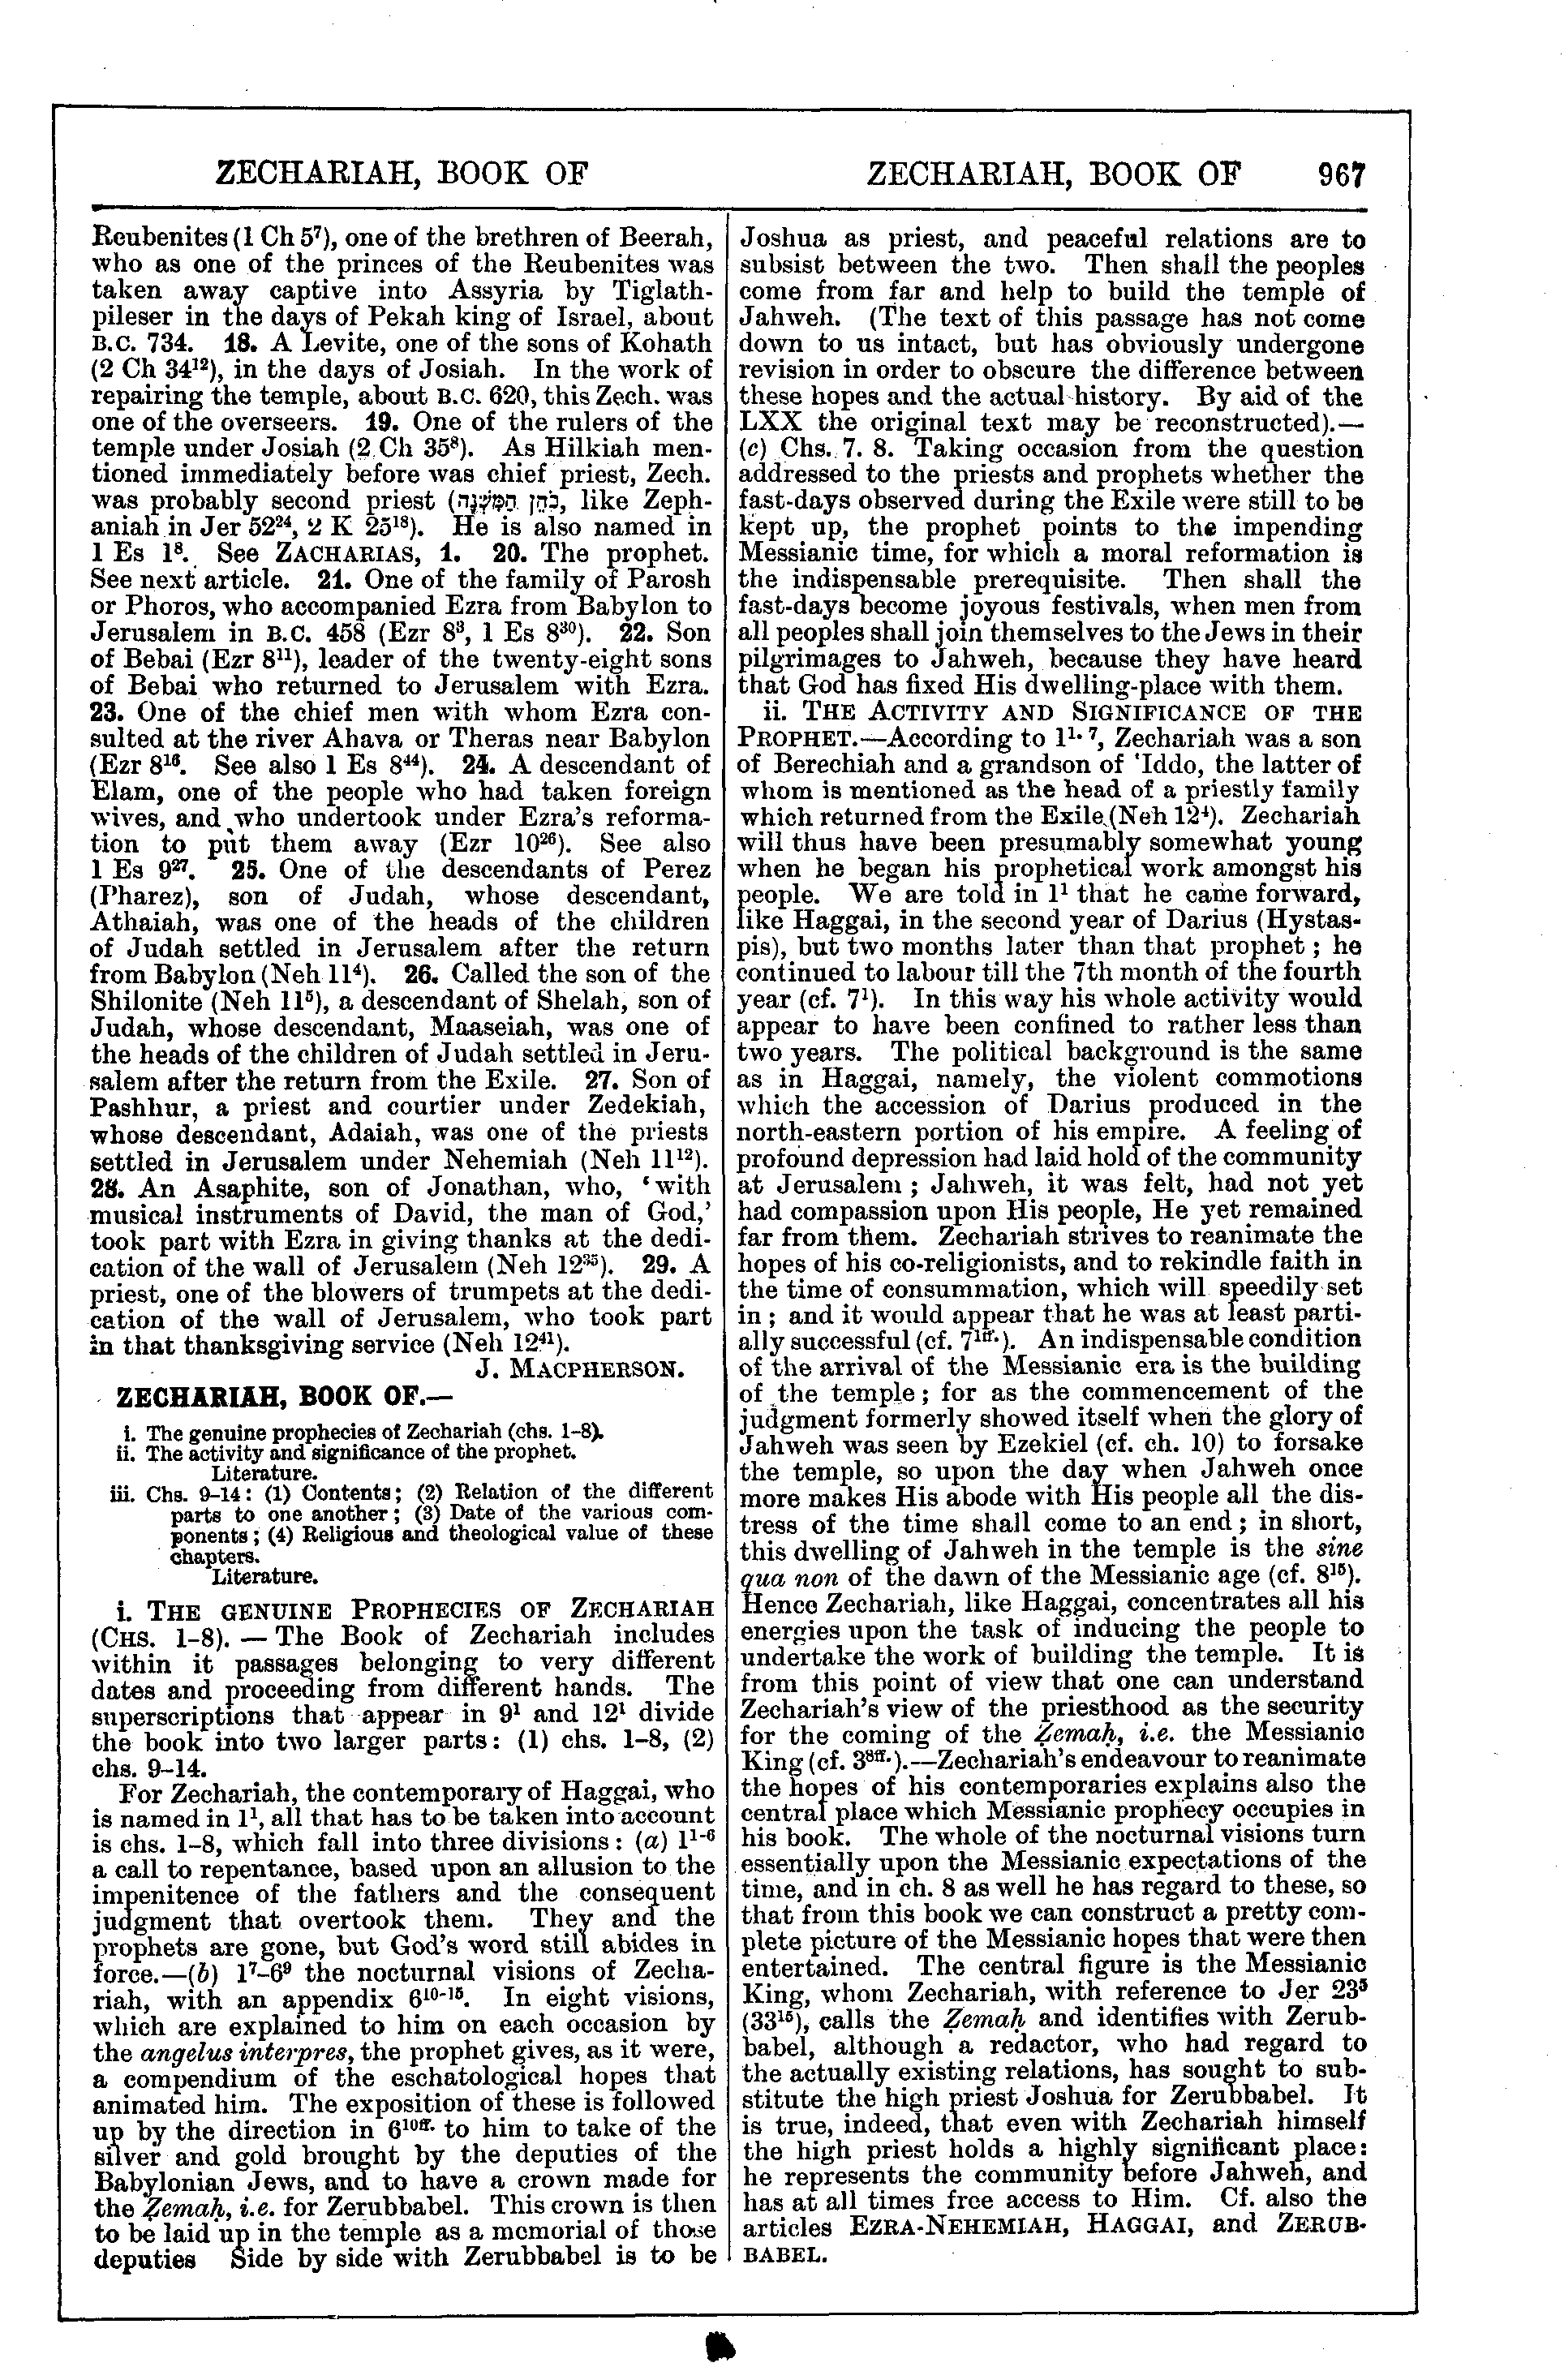 Image of page 967